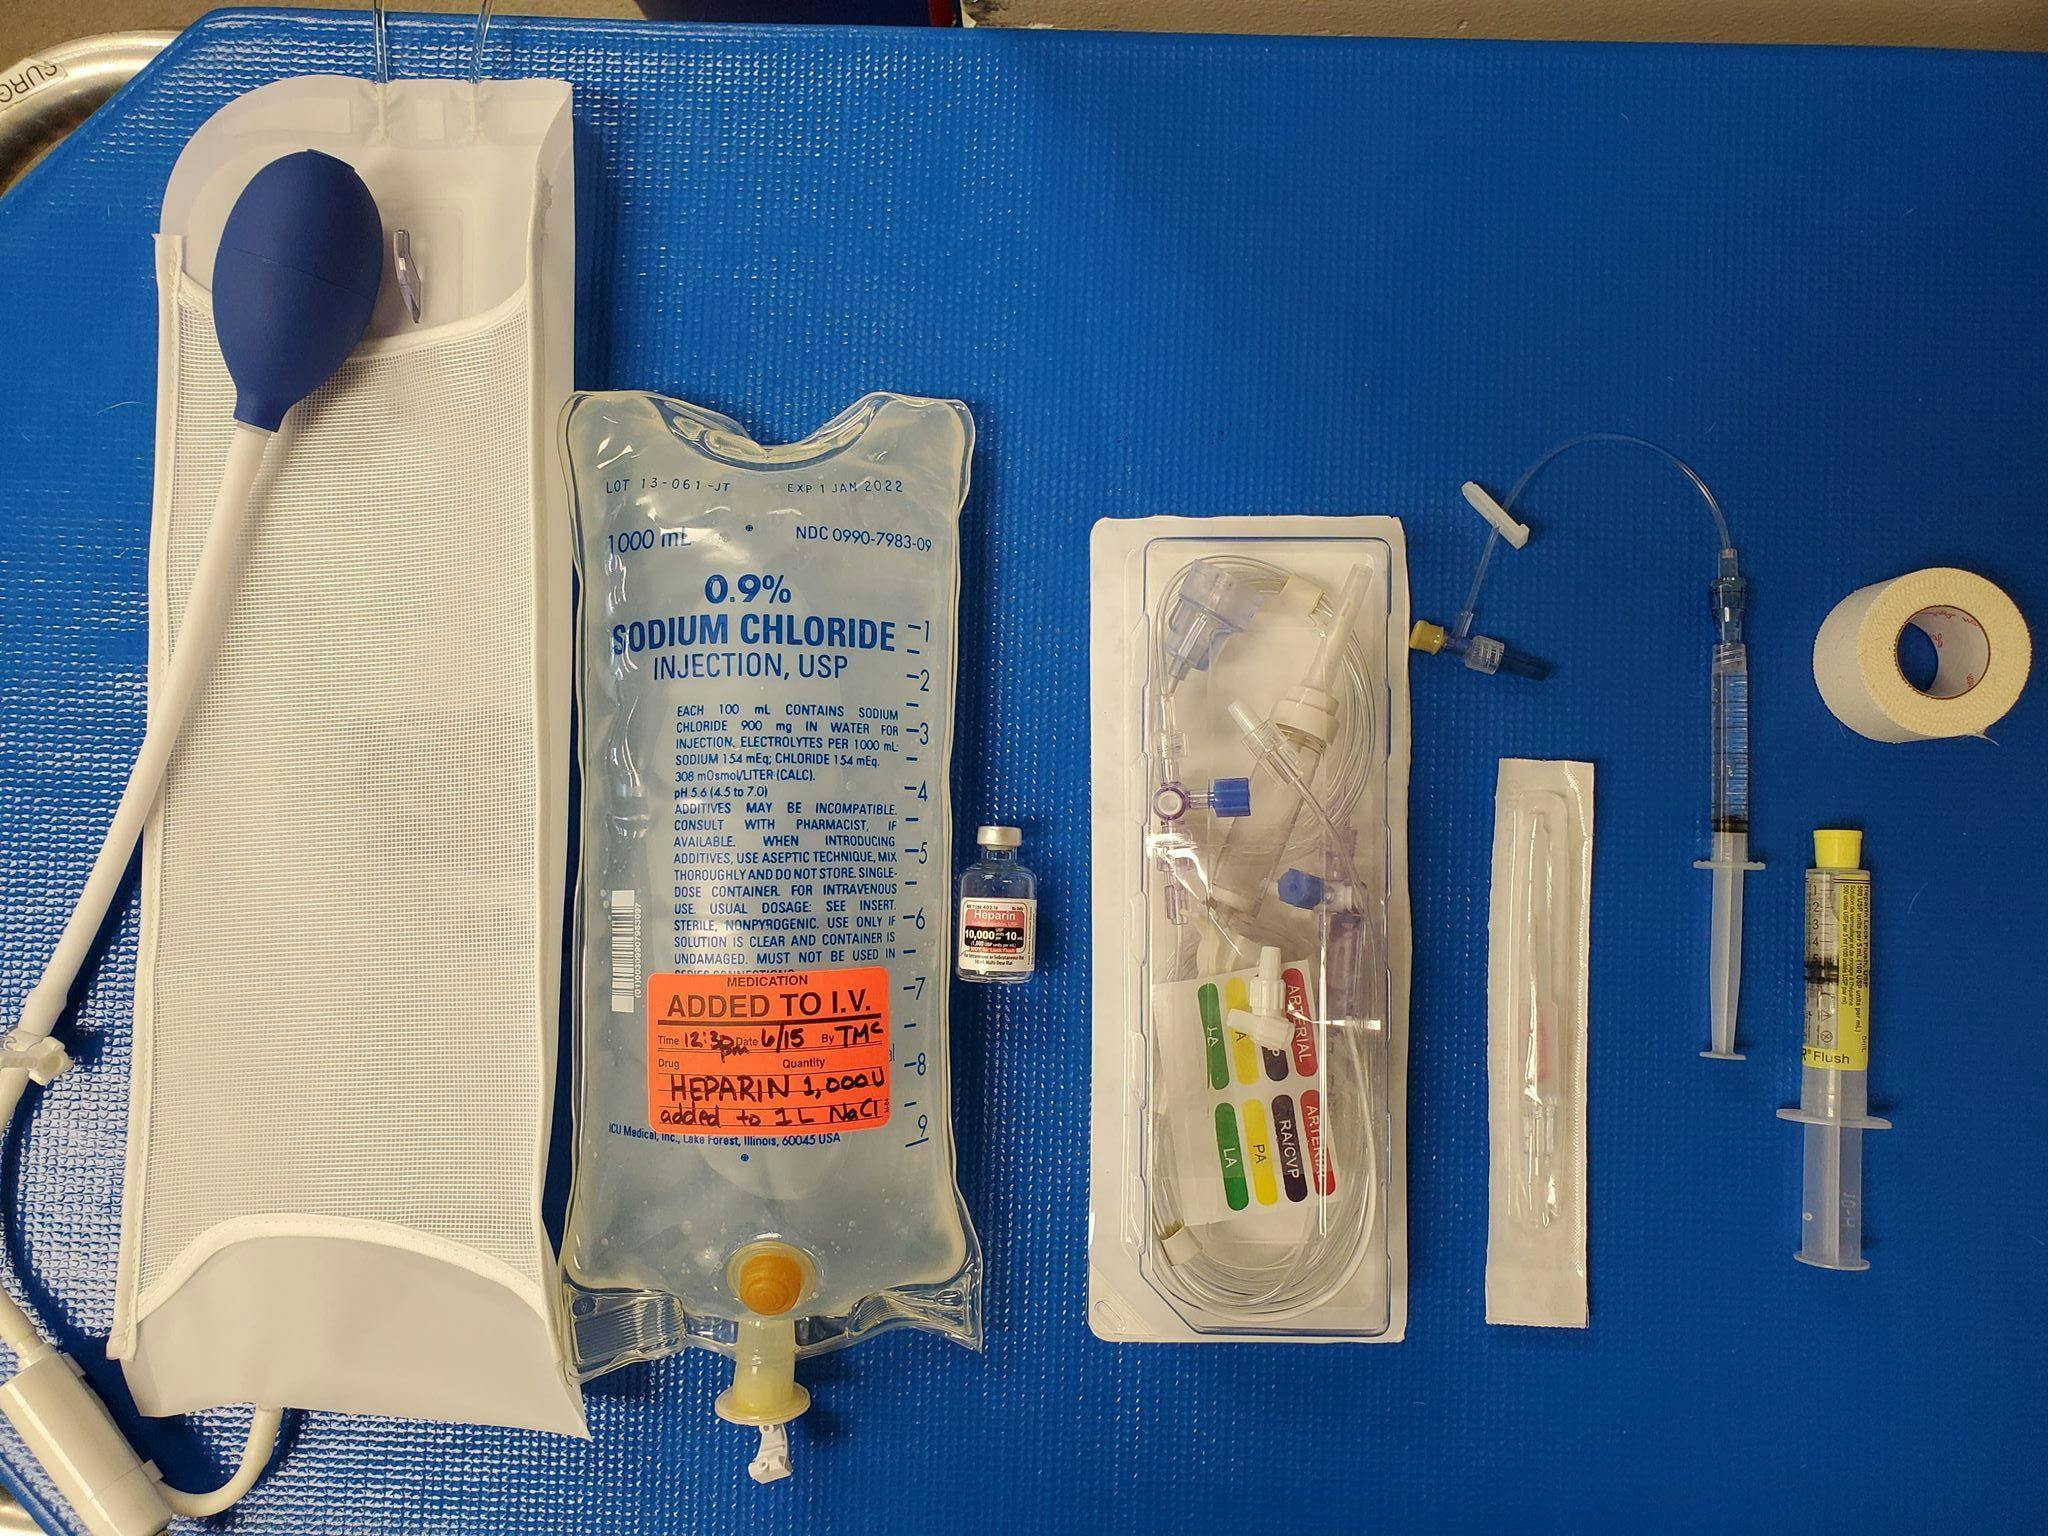 Figure 1. Basic setup for placement and monitoring of arterial blood pressure. From left to right: pressure bag for sodium chloride (NaCl), heparinized NaCl bag, heparin 1000 U/mL, fluid bag spike and transducer appropriate for your multiparameter monitor, appropriate-sized catheter, T set flushed with heparinized saline, extra heparinized saline flush, medical tape to secure catheter.